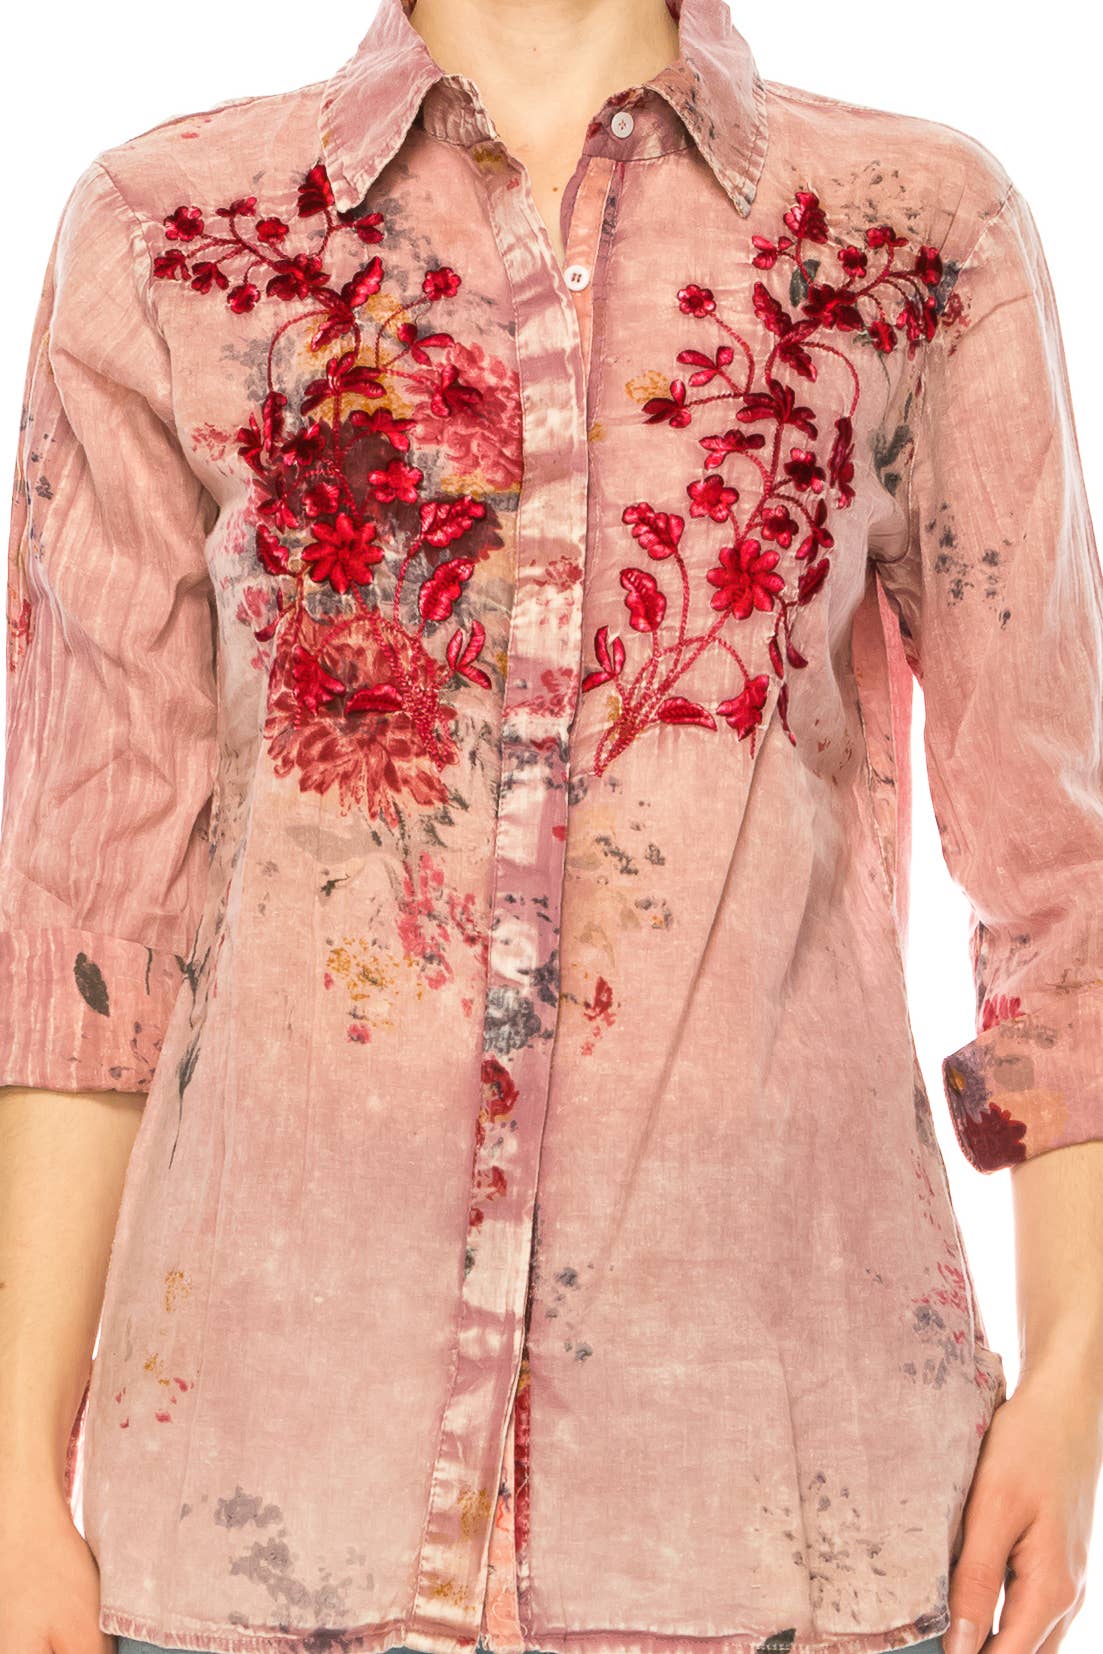 Magazine Clothing - Vintage Pink Floral Printed Shirt with Embroidery: Small